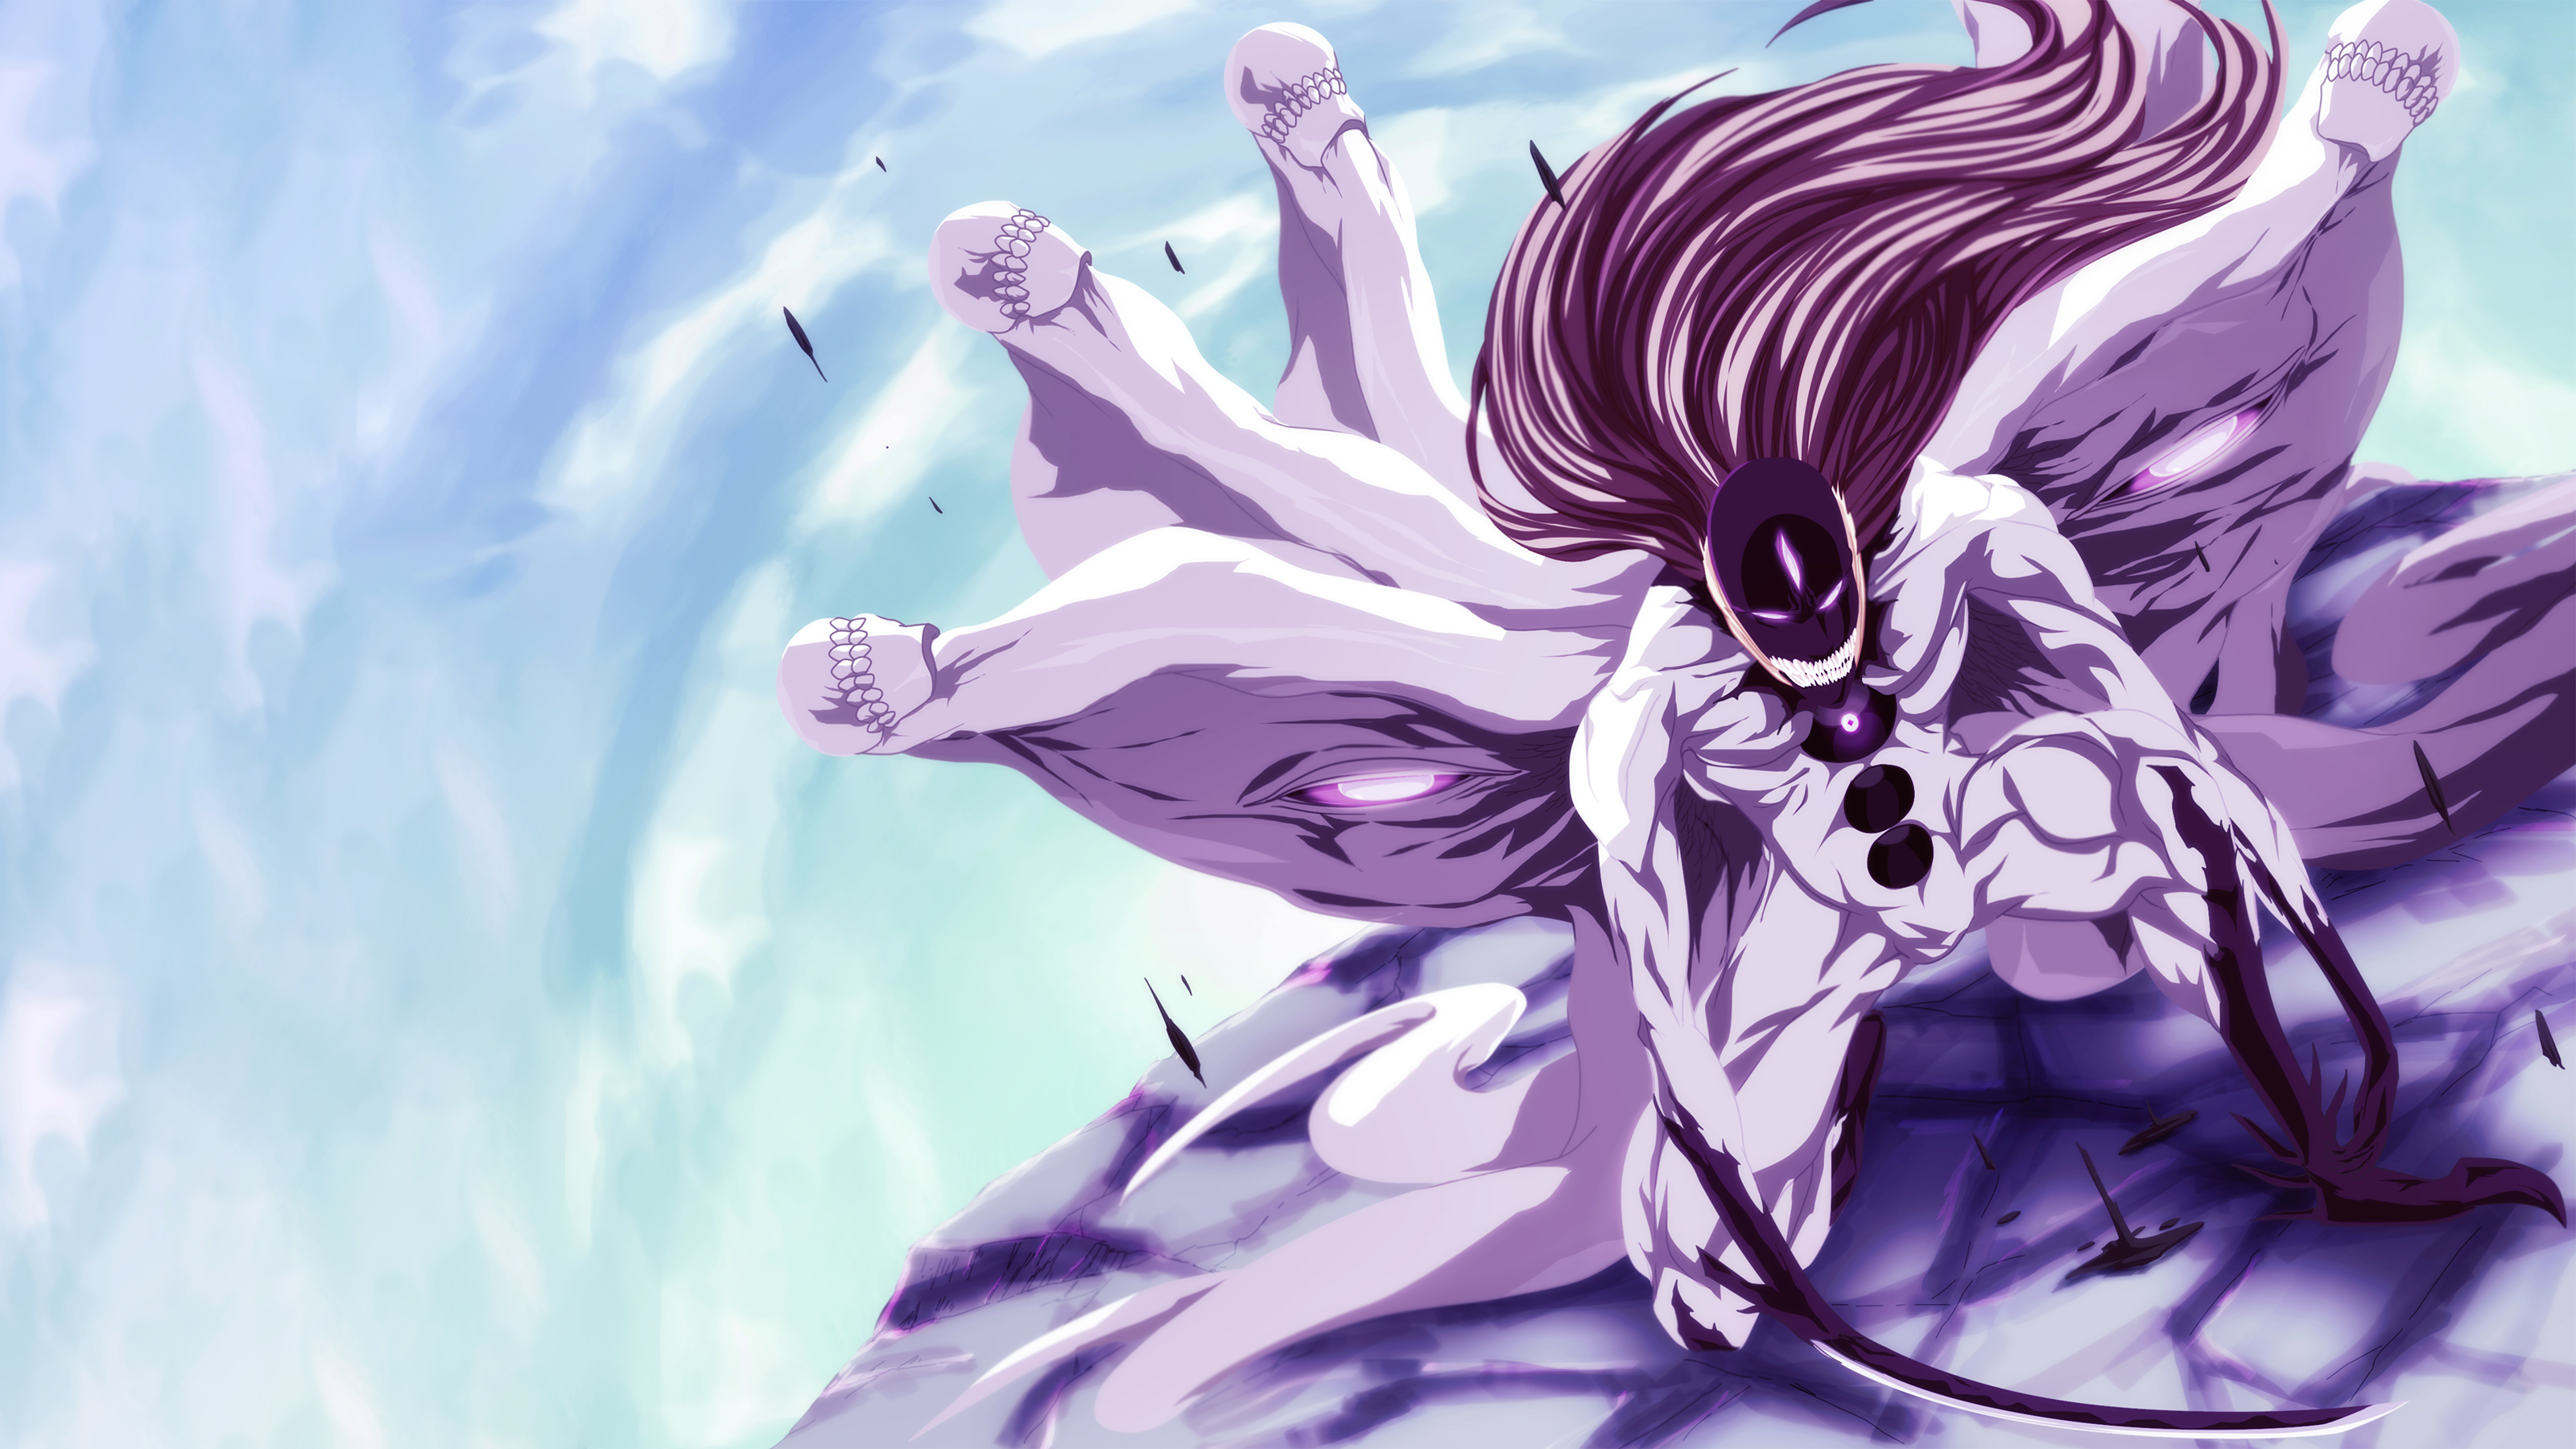 Sosuke Aizen Wallpapers With Impressive Designs For Bleach Fans